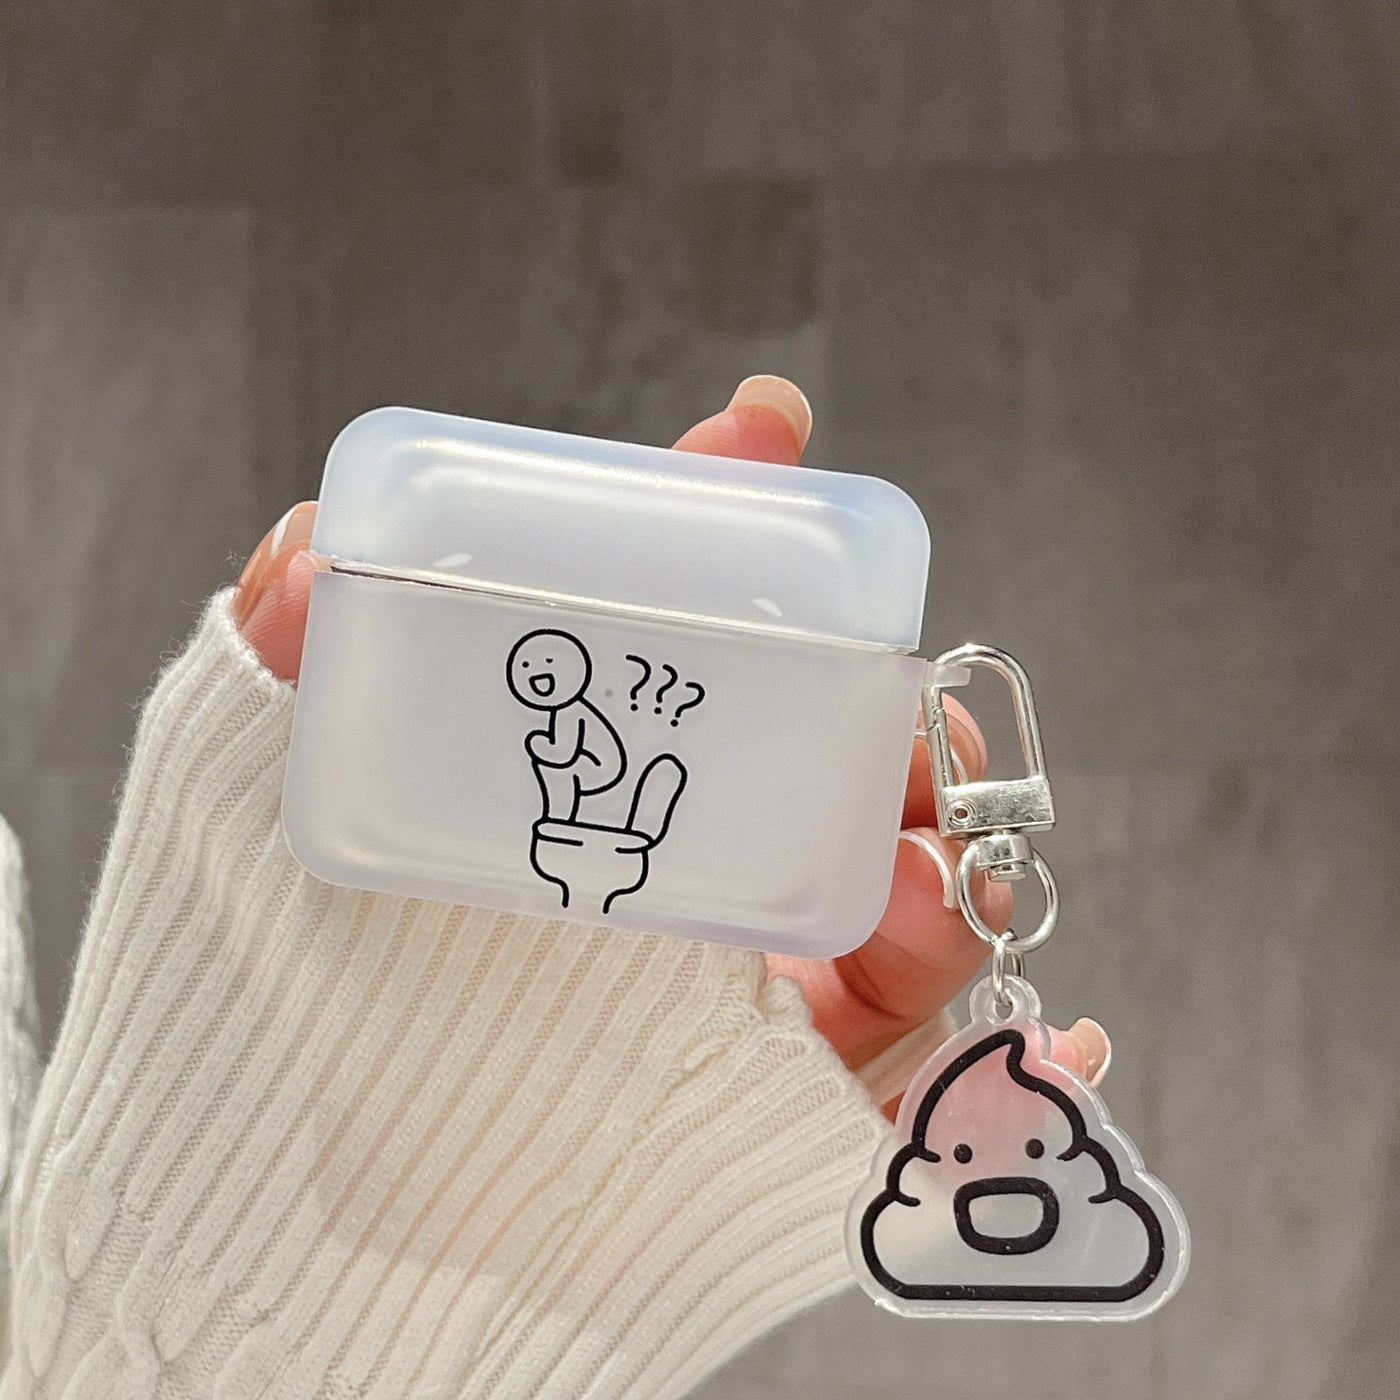 【Airpods Case】面白い トイレ うんこ Airpods/ AirPods Pro/Airpods 第三世代ケース